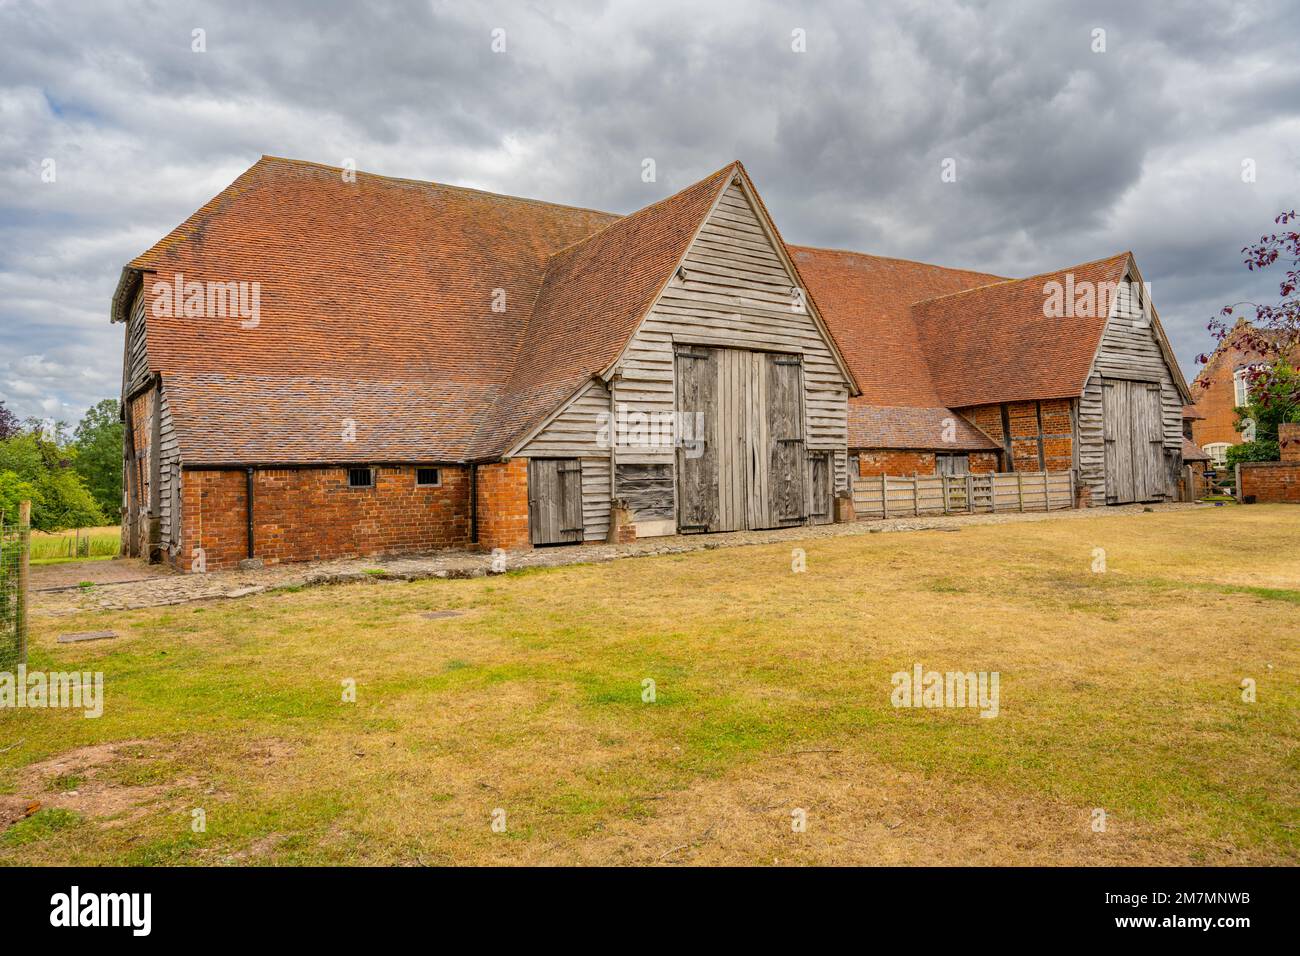 Leigh Court Barn at Leigh near Worcester, Worcestershire. one of the oldest cruck framed barns in Britain. Stock Photo